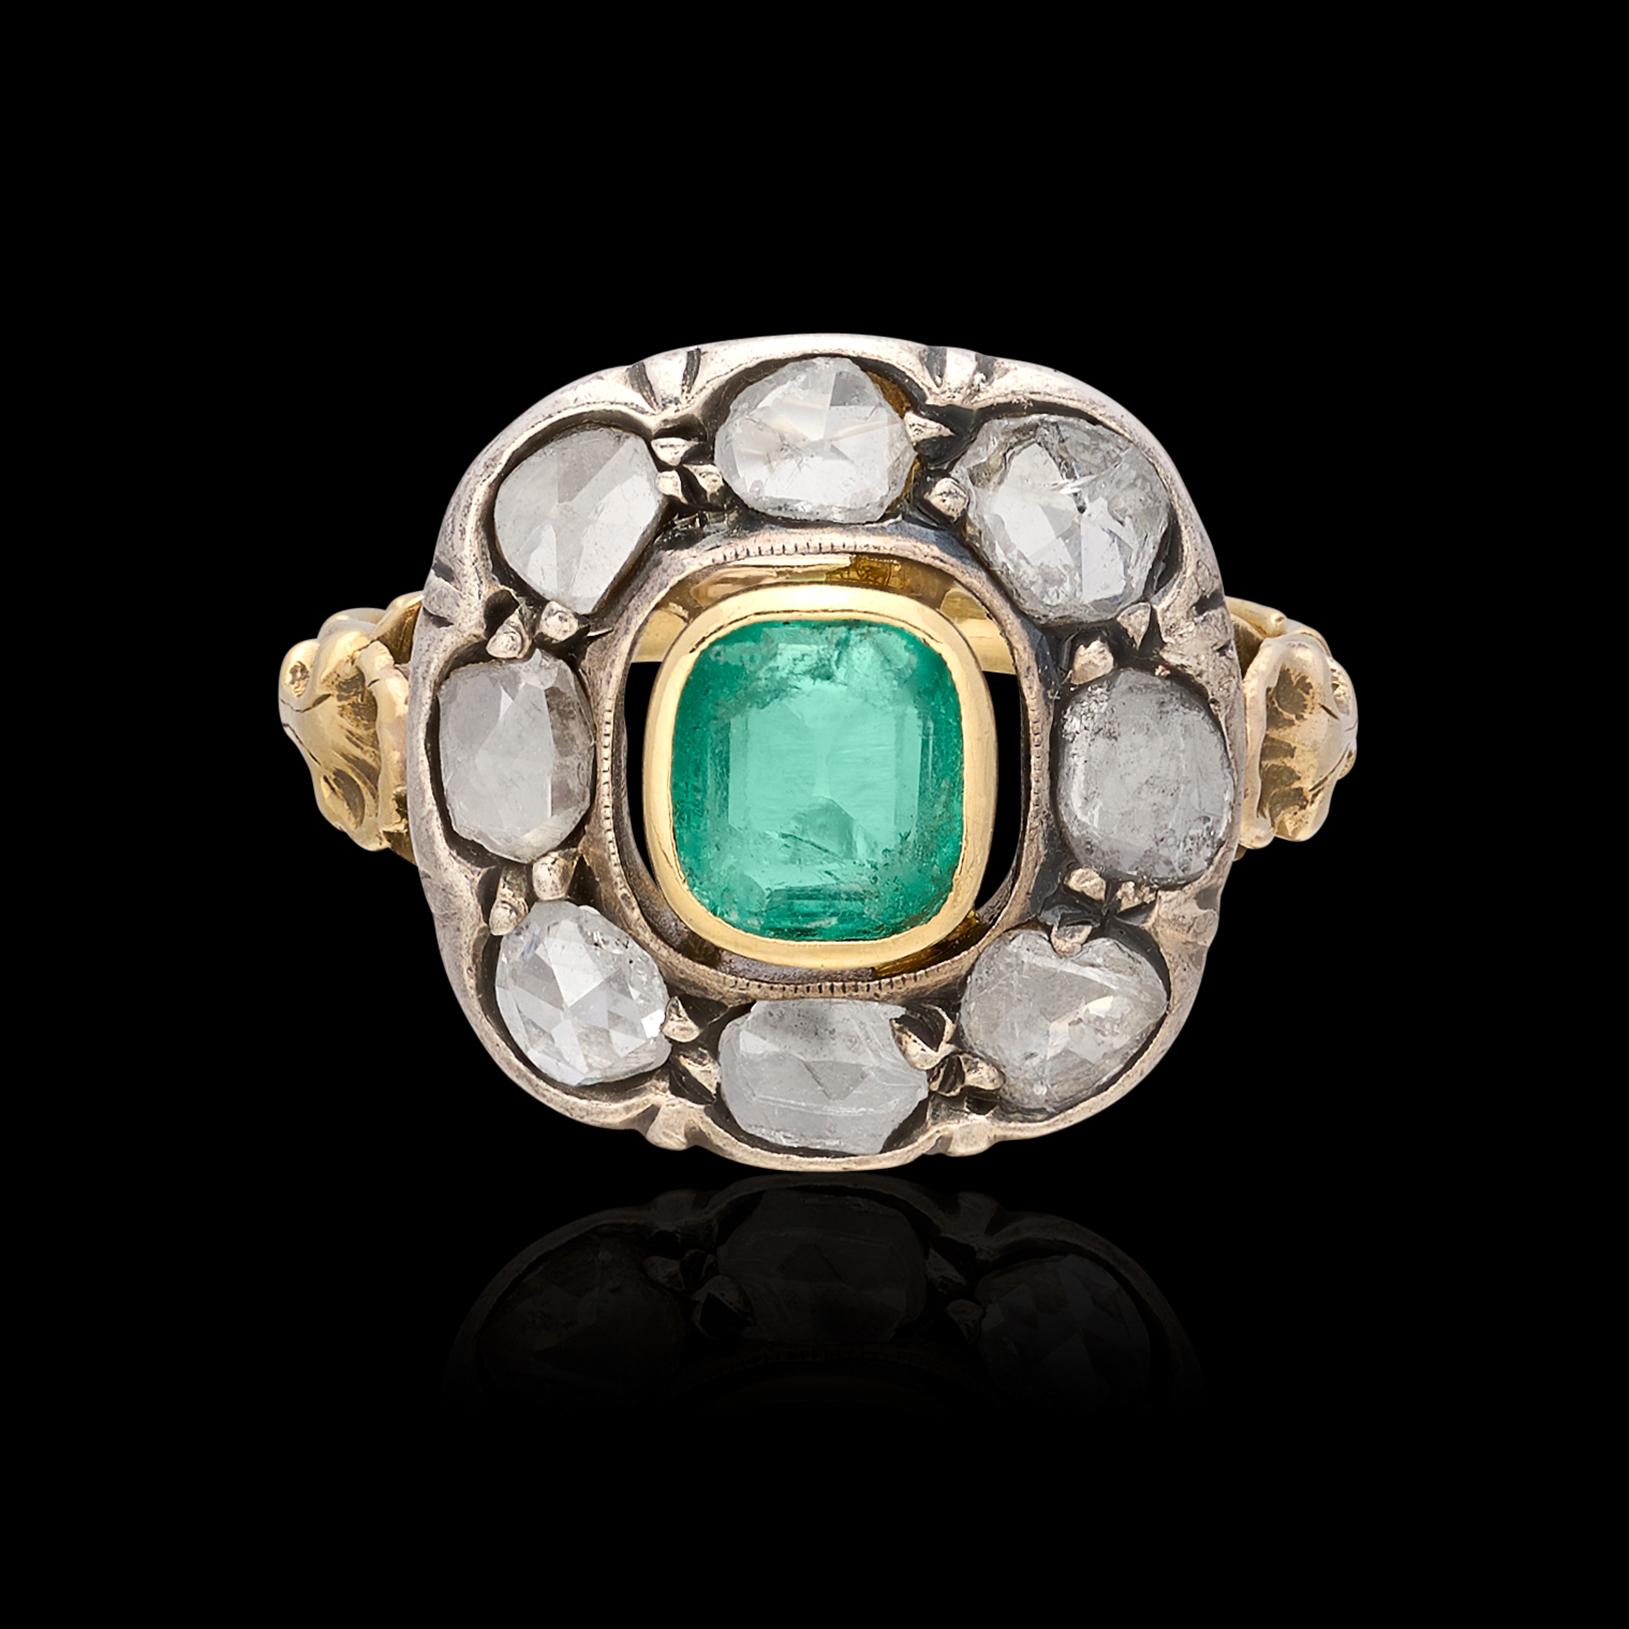 A gorgeous piece of history at your fingertips. This incredible antique emerald ring circa 1840 features a well saturated 0.55 carat emerald surrounded by a halo of 8 old single cut stones for 0.80 carats. The silver topped 18 karat yellow gold ring